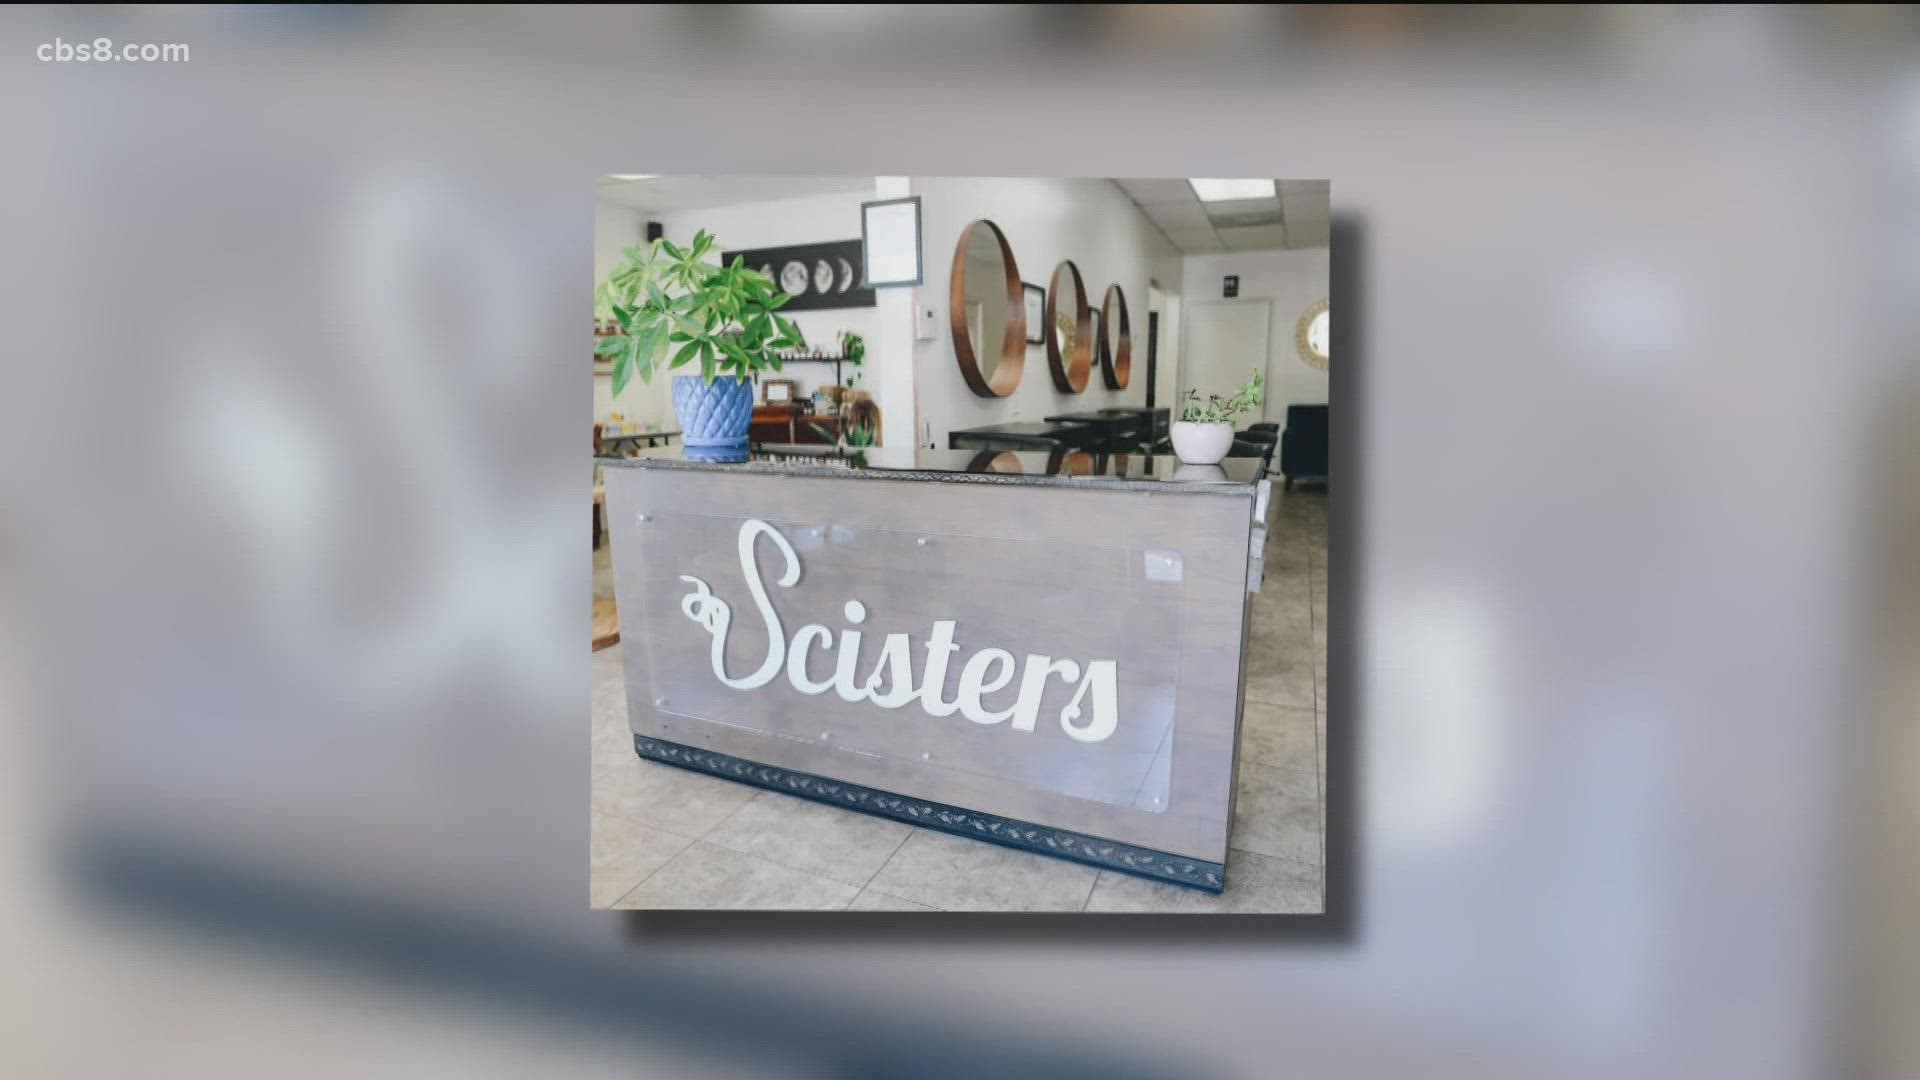 Scister’s Salon and Apothecary in La Mesa works to reuse or recycle 99% of what is used and provide toxin-free, sustainable beauty items to the public